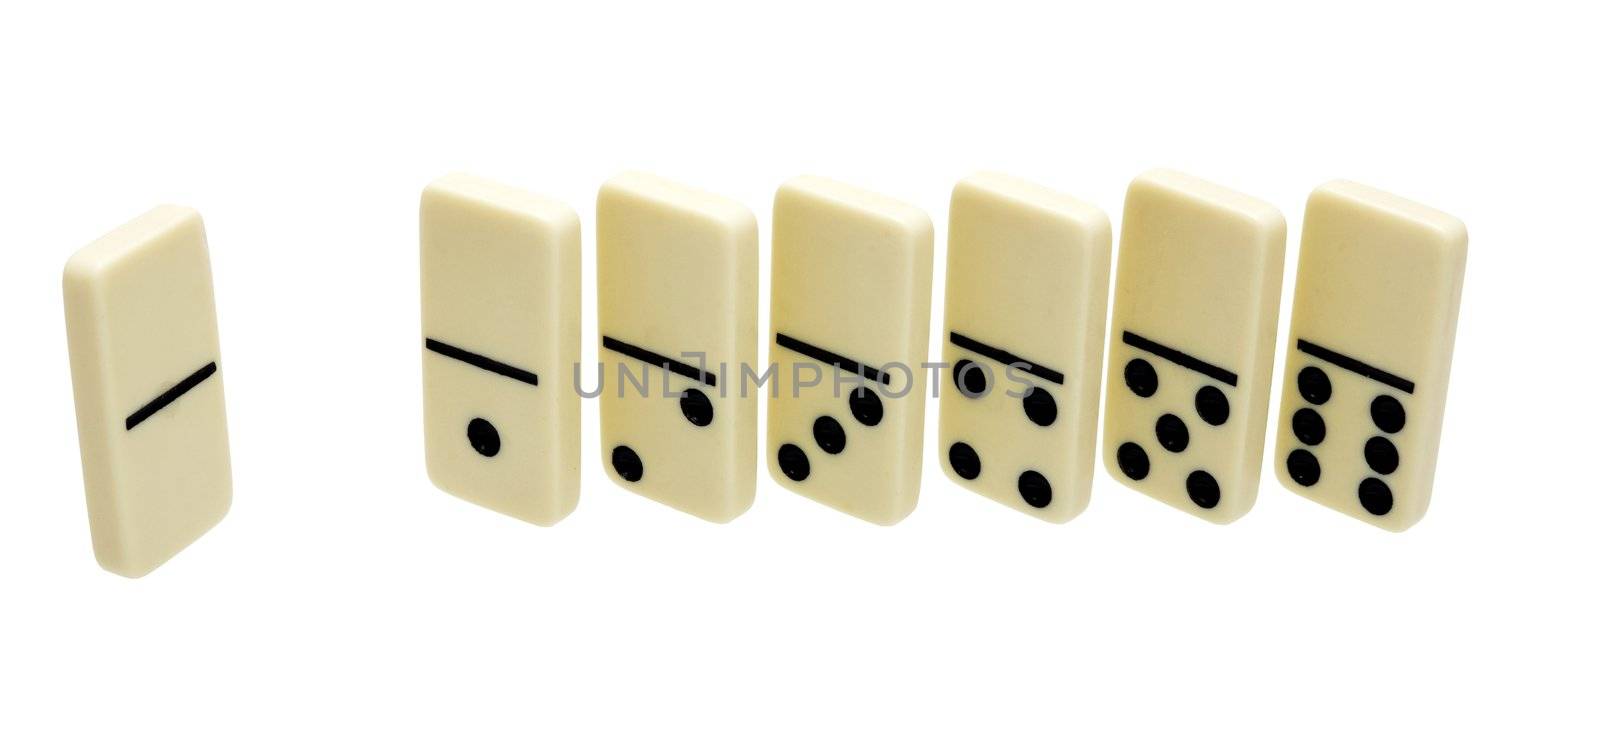 seven domino's dice by pzaxe